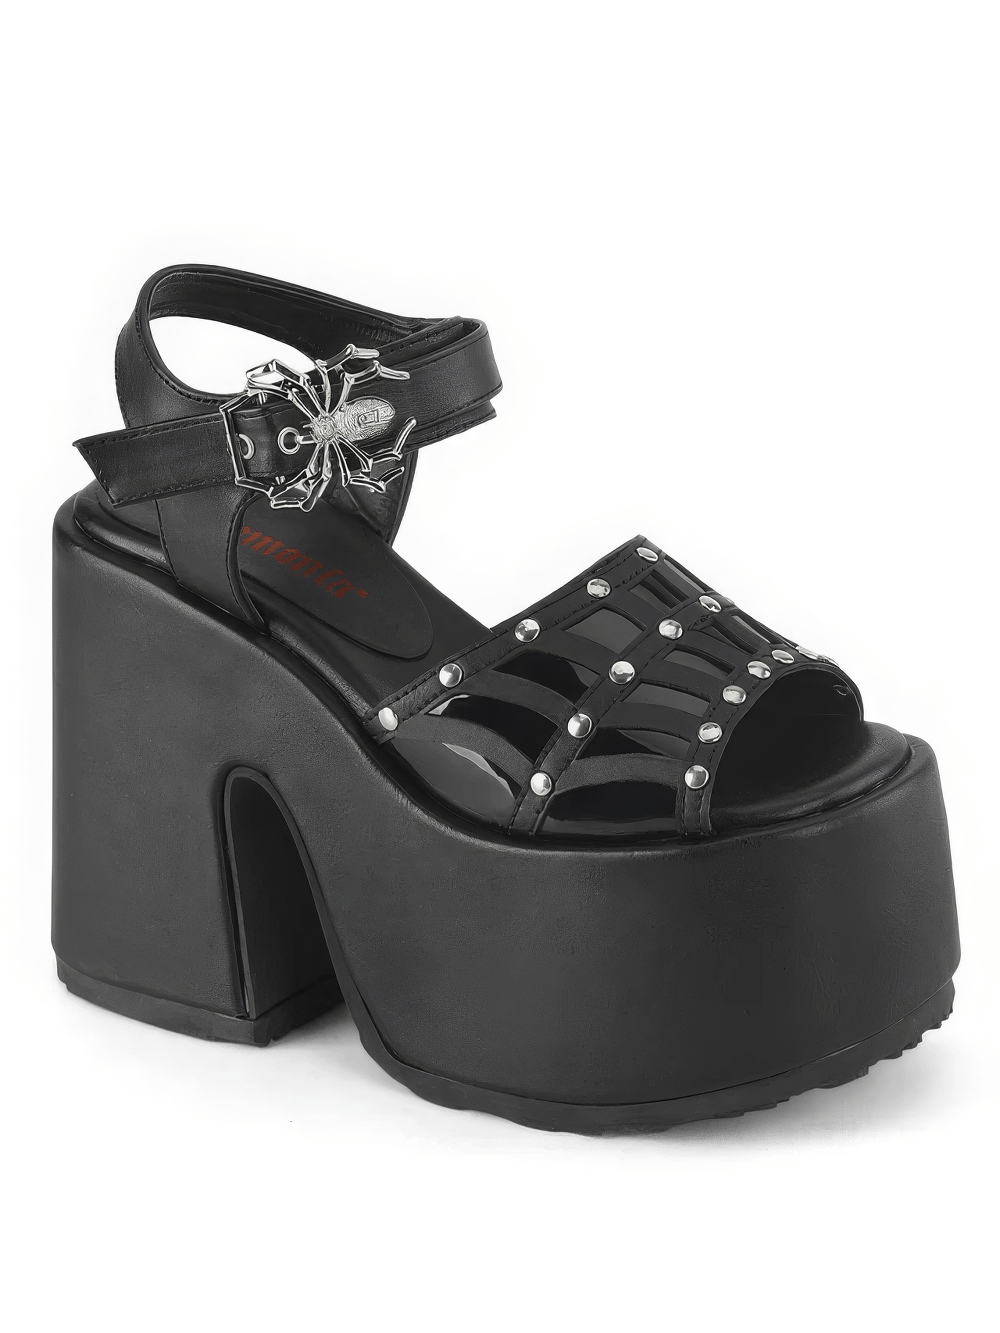 DEMONIA Chunky Heel Ankle Strap Sandals with Spider Buckle